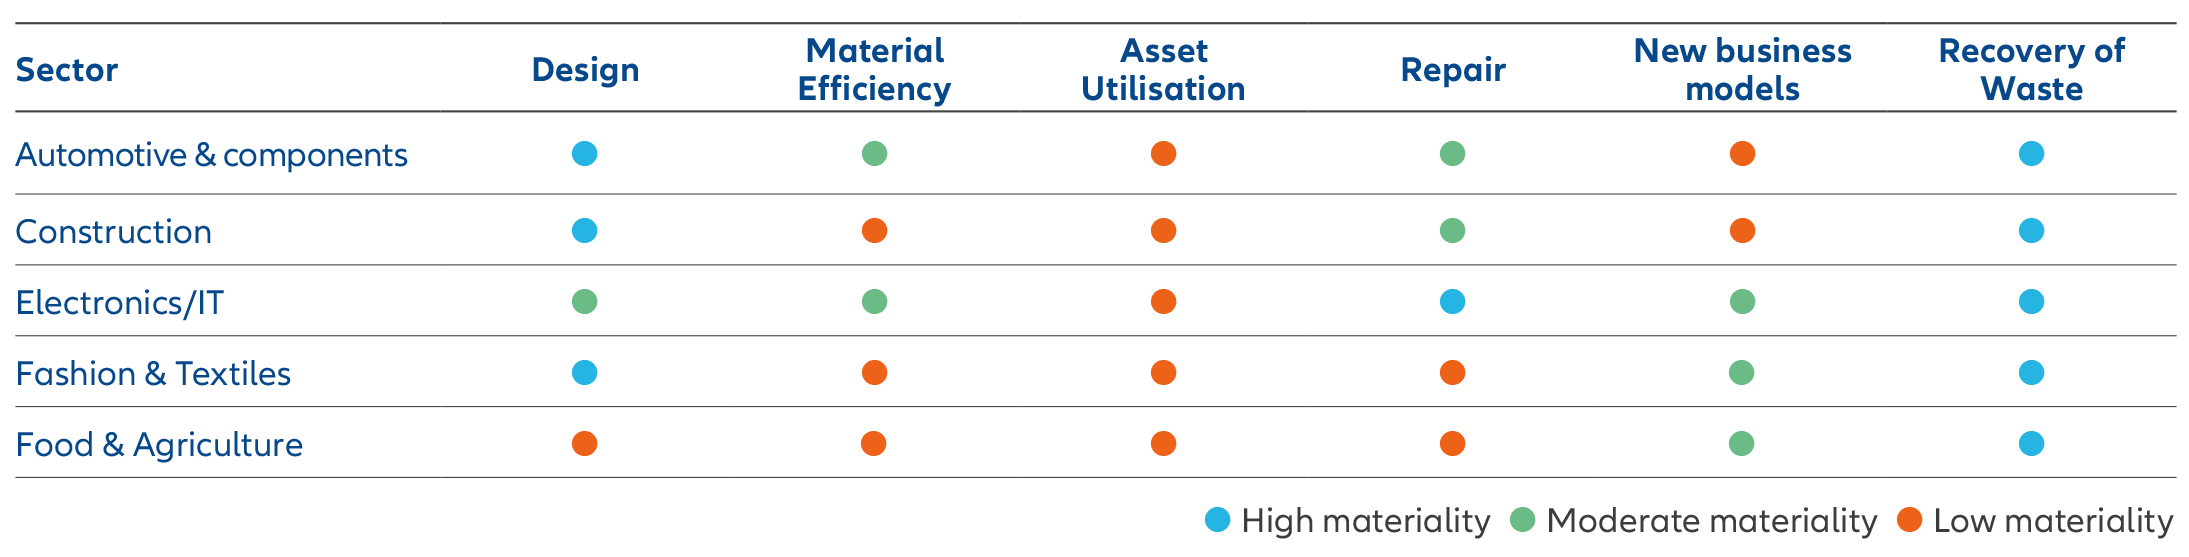 Exhibit 8: Materiality of the components of the CE for select sectors